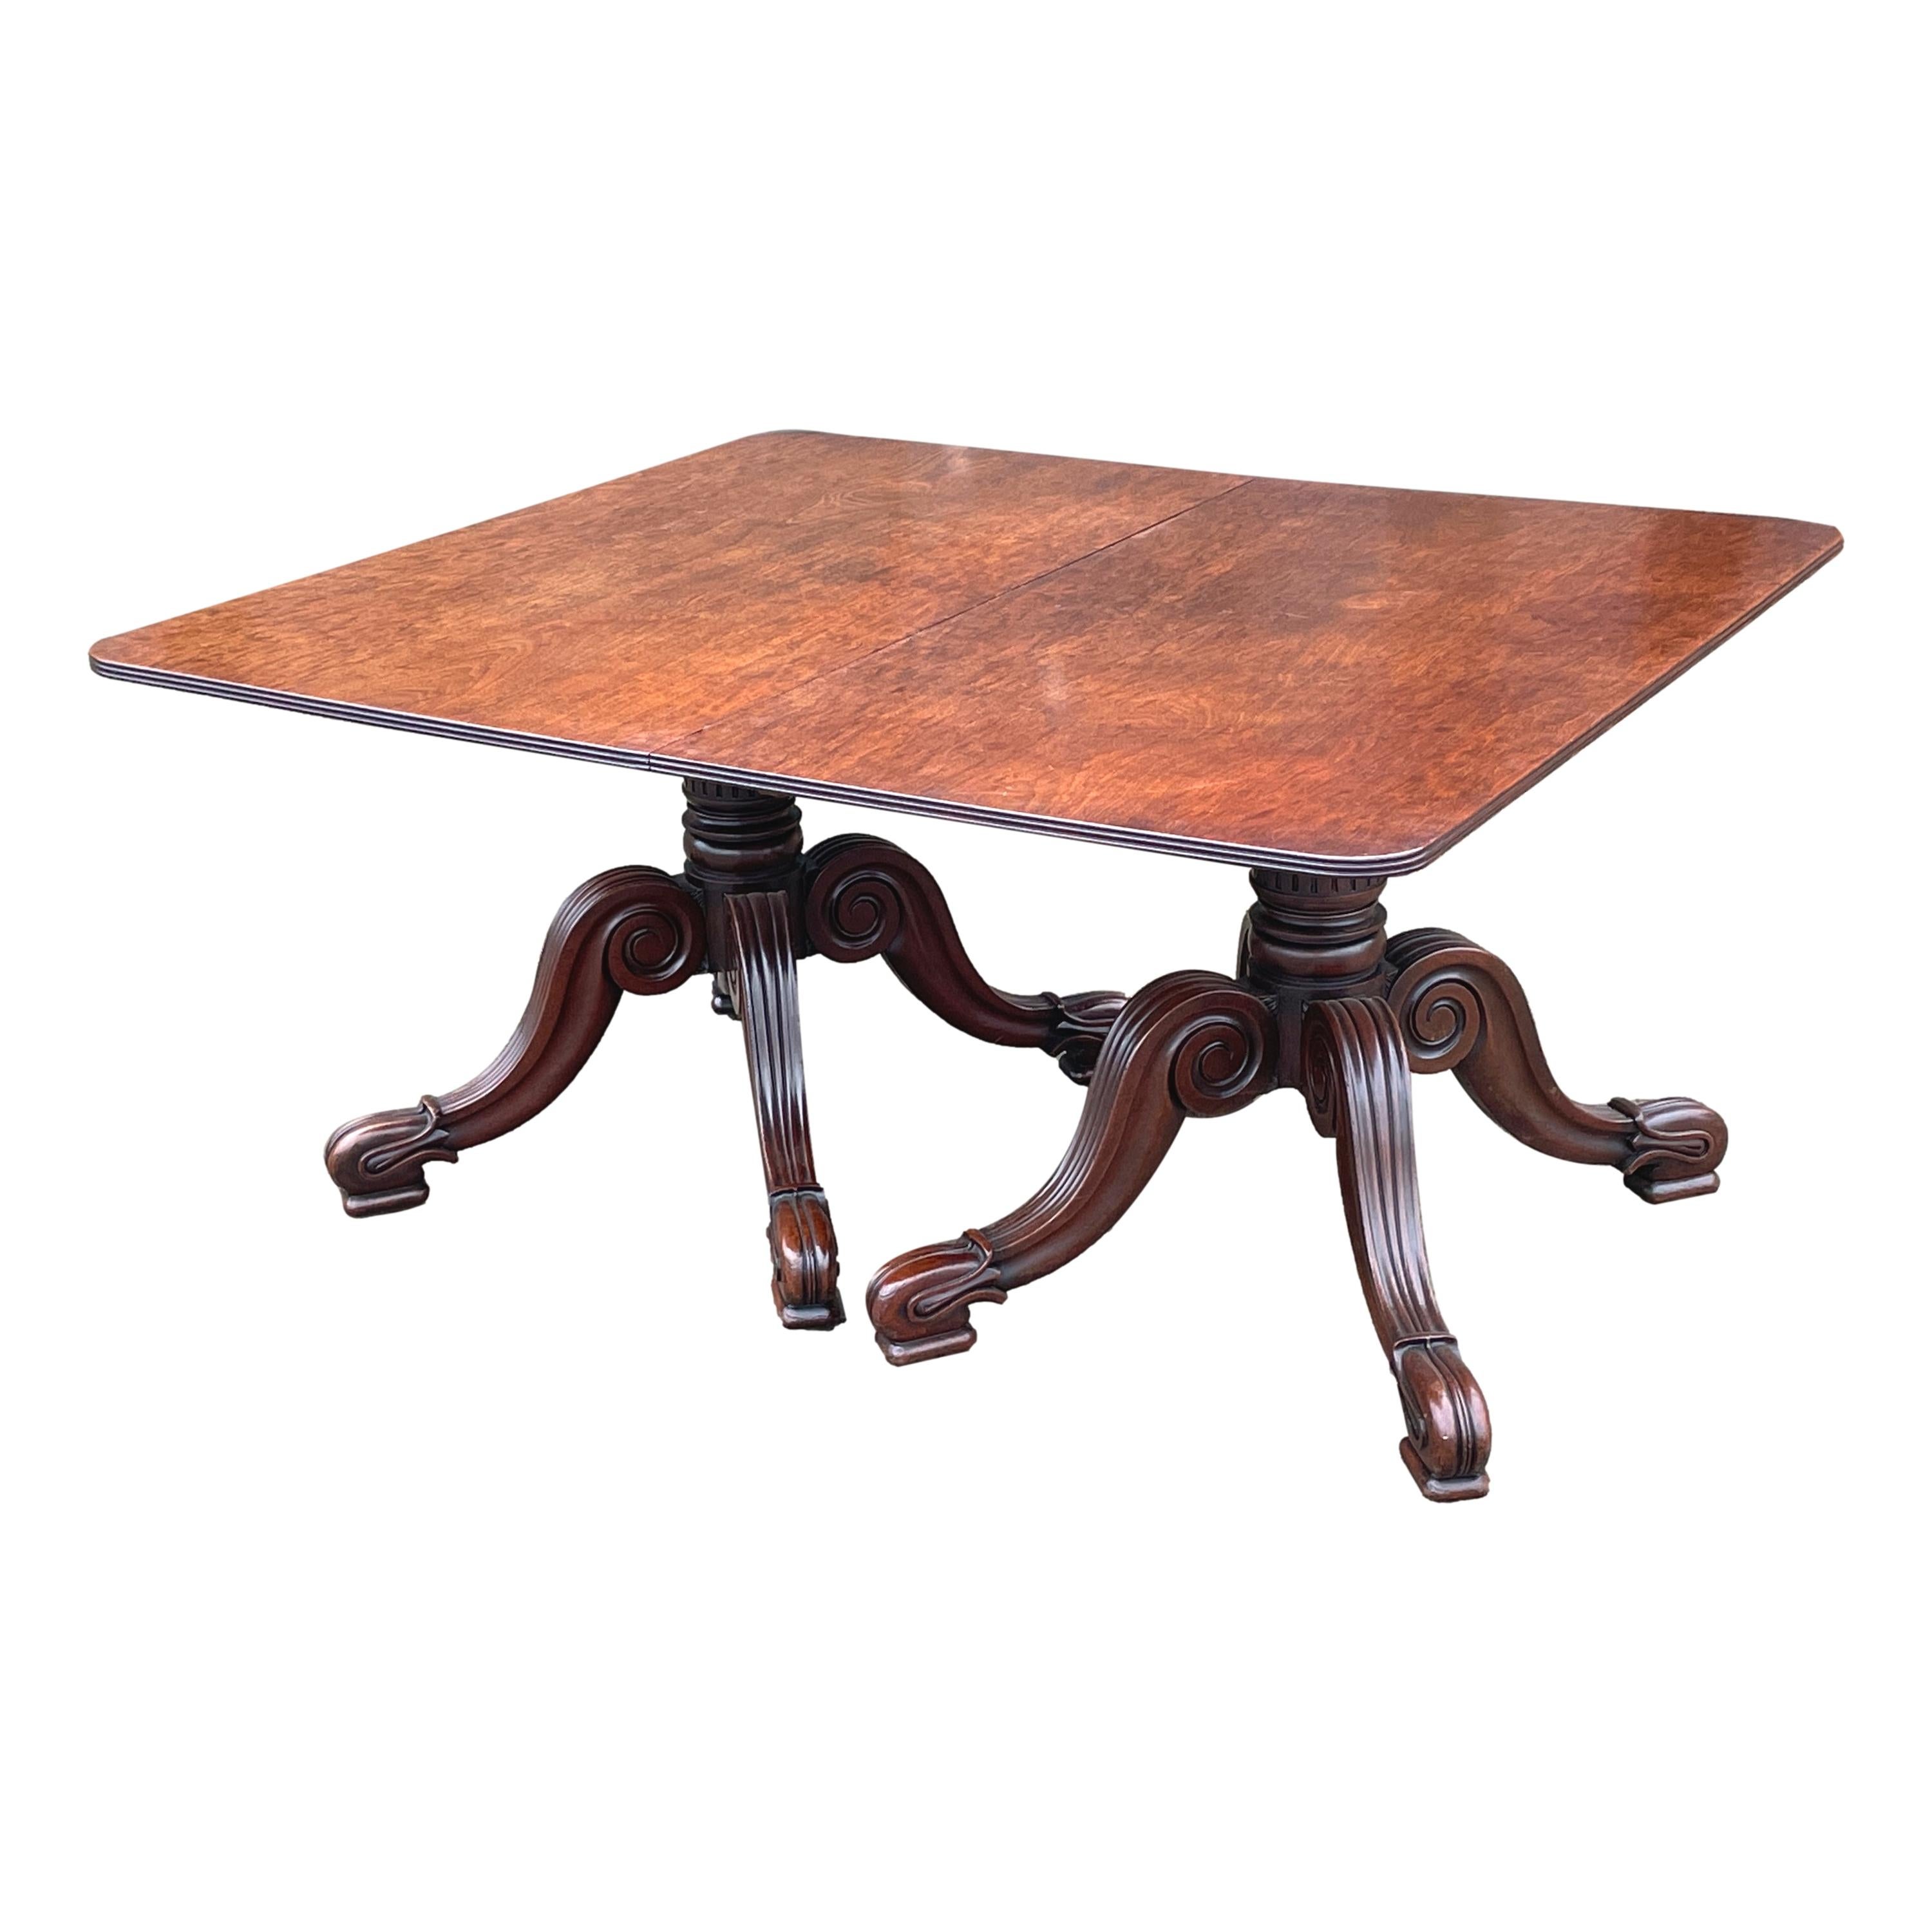 Regency Mahogany Twin Pillar Dning Table In Good Condition For Sale In Bedfordshire, GB